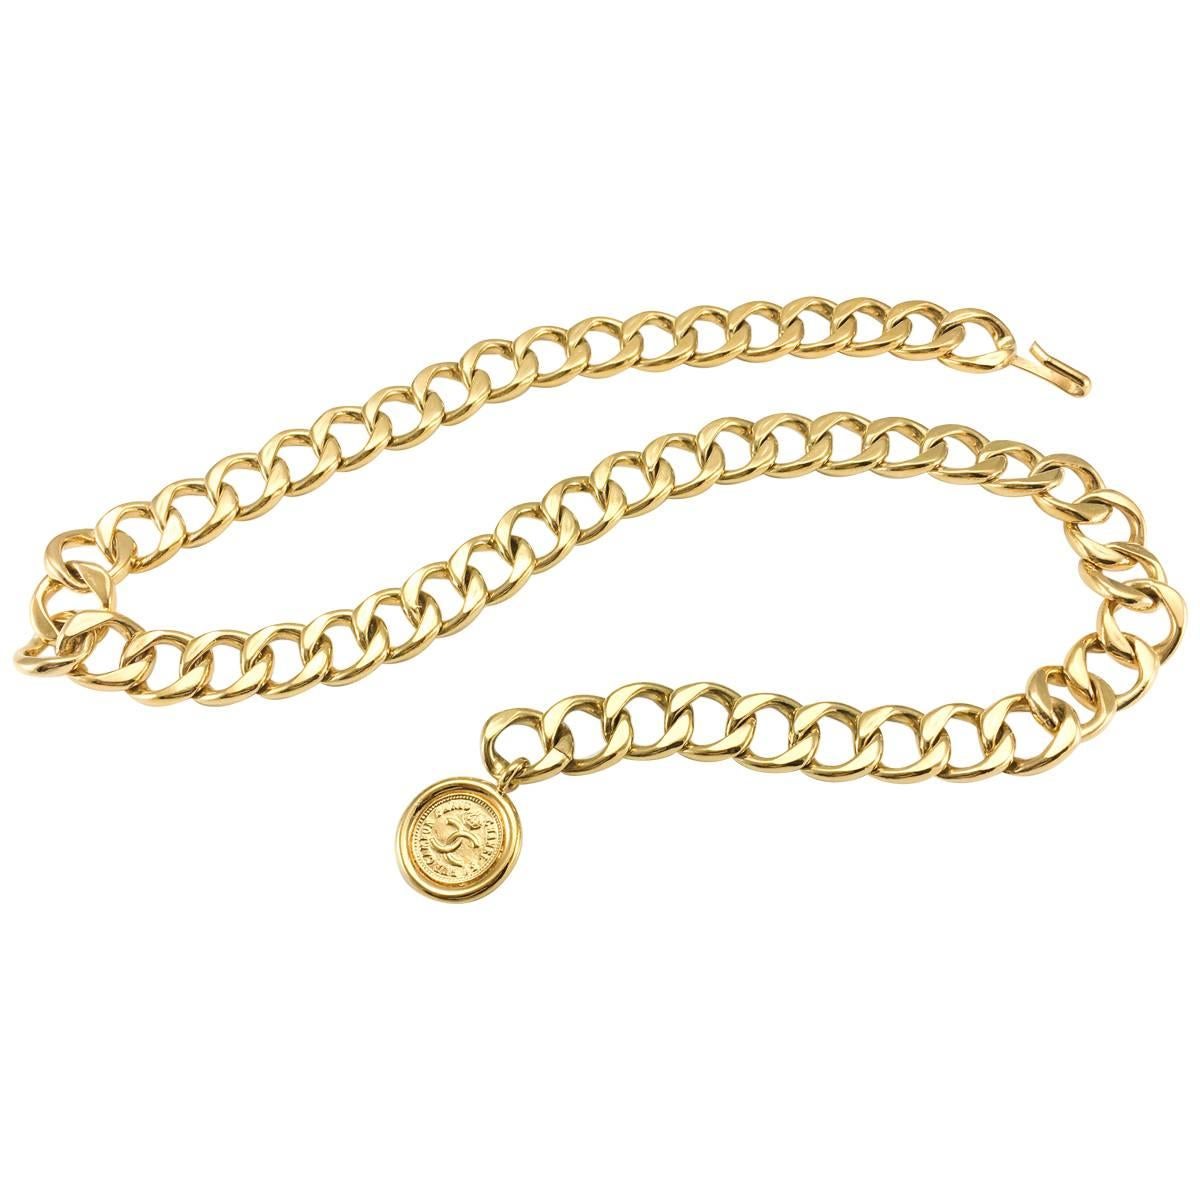 1980's Chanel Gold-Tone Medallion Chain Necklace / Belt